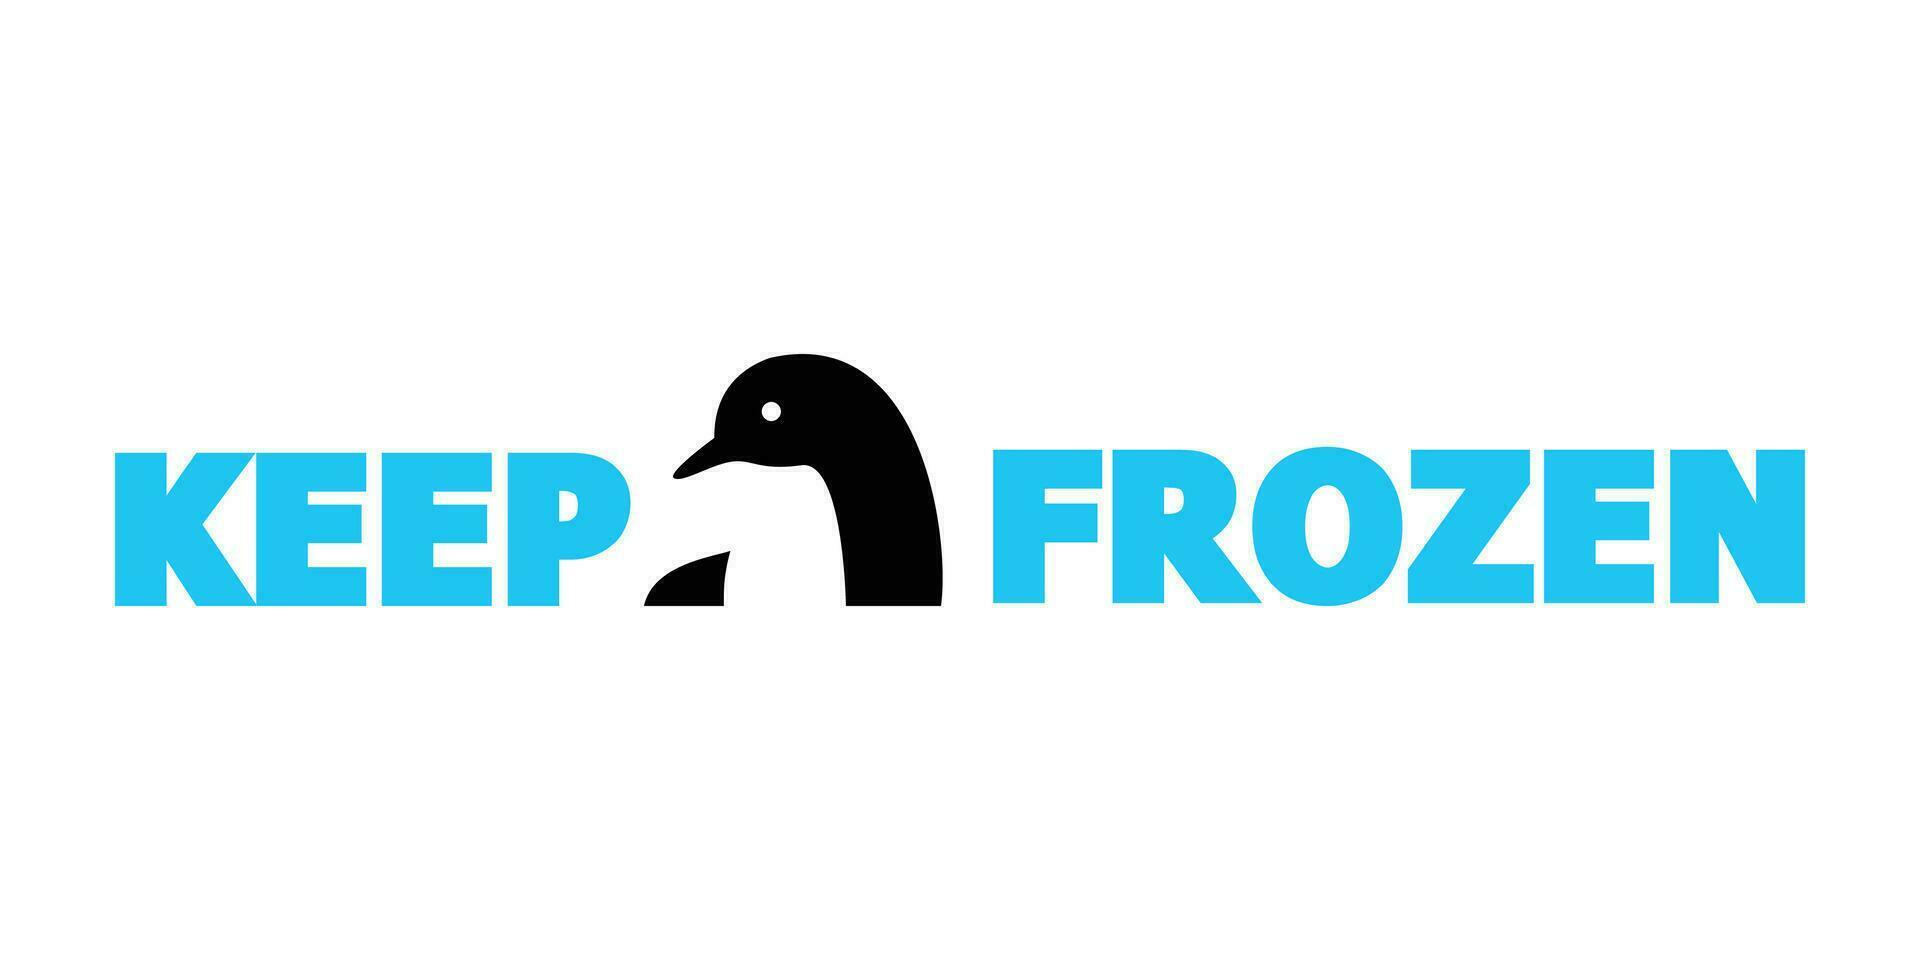 keep frozen label design. cold product sign and symbol. vector